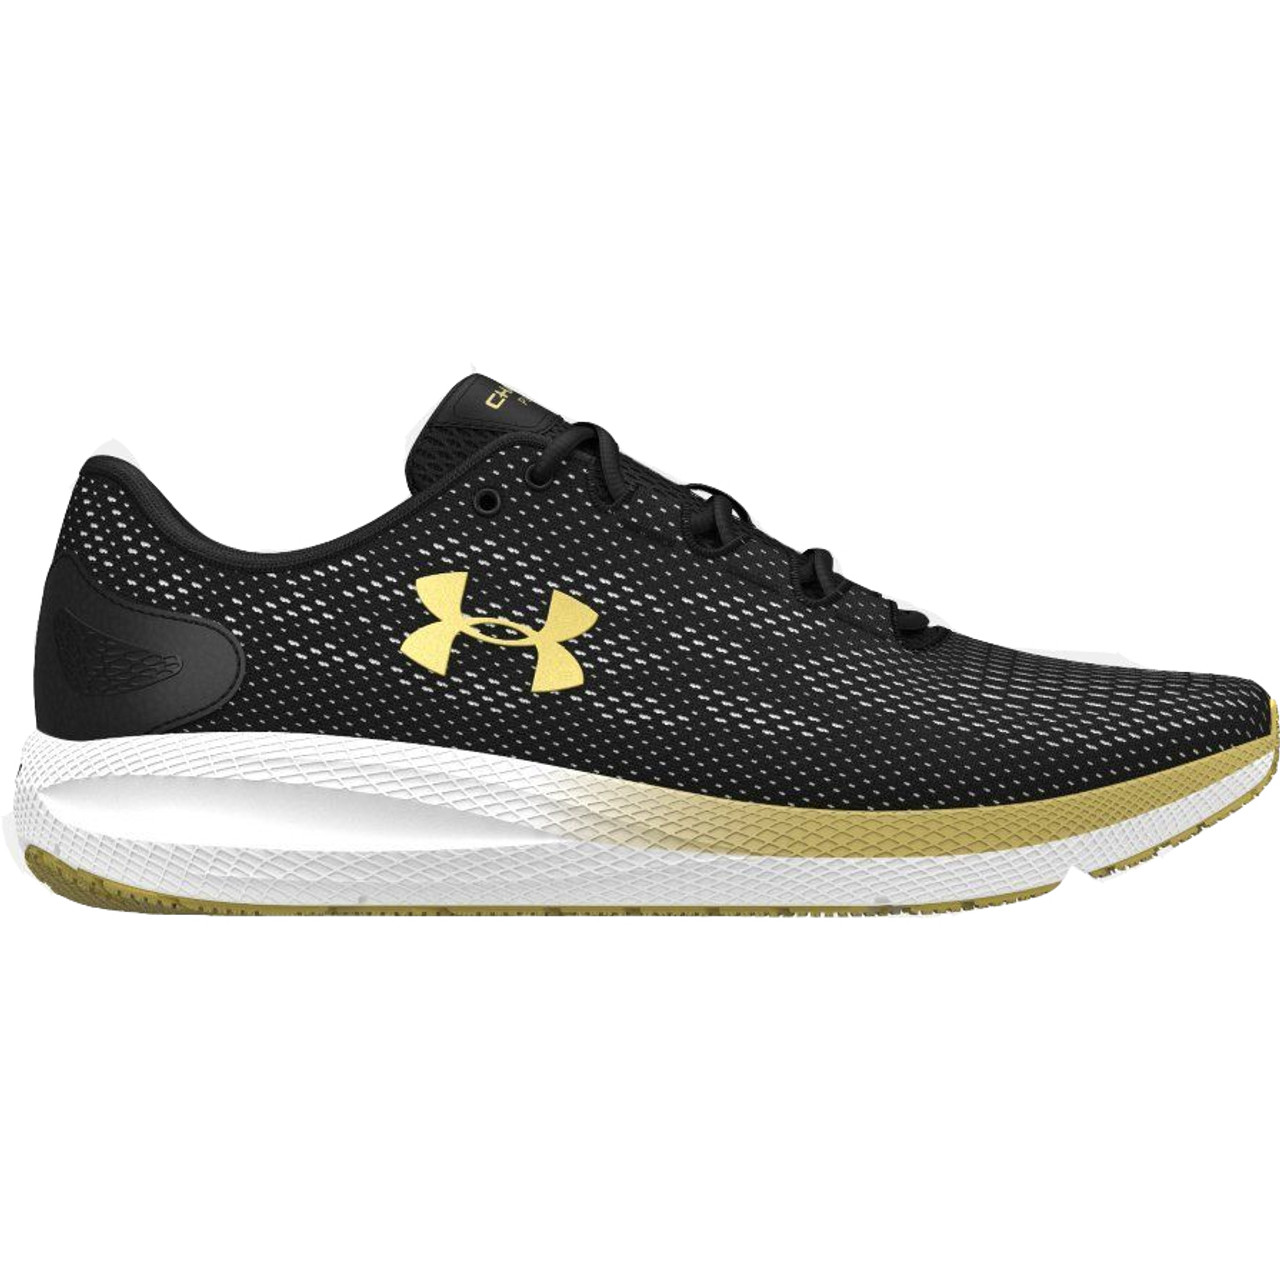 Under Armour Charged Pursuit 2 Men's Running Shoes